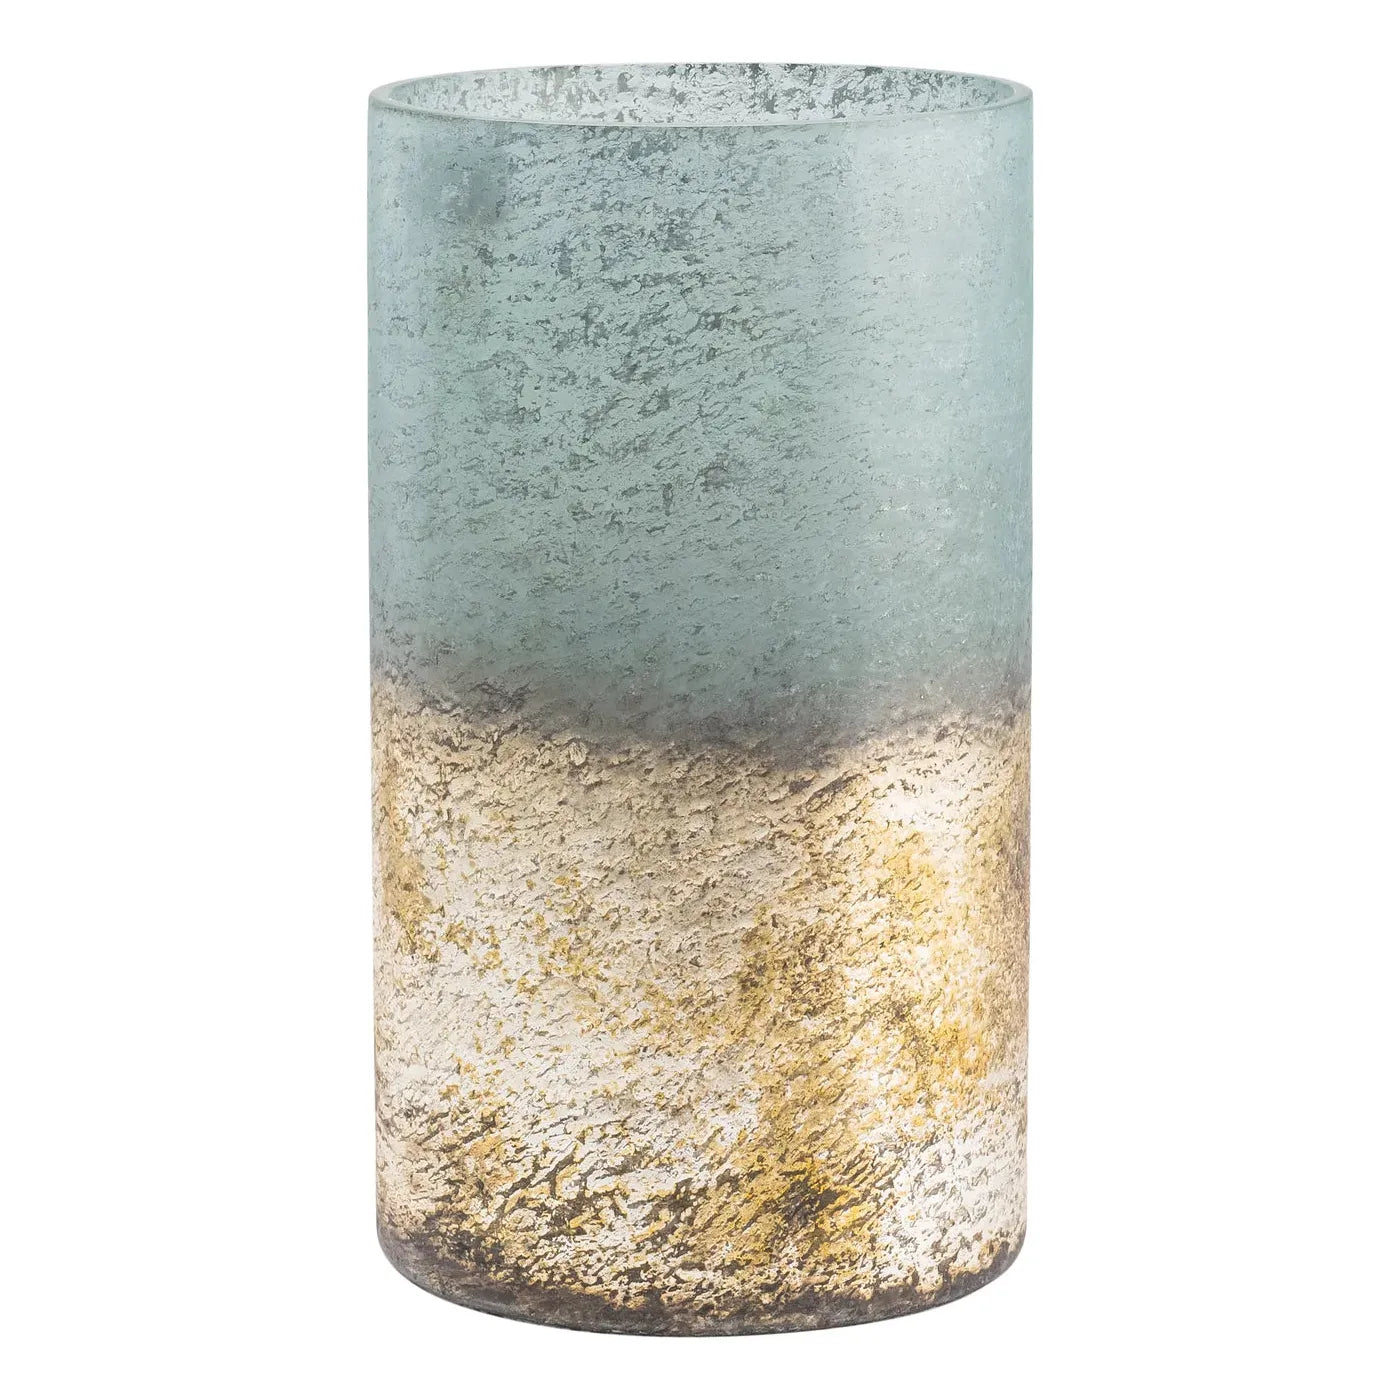 A cylindrical tall vase with a textured gradient design. The top half is a weathered teal color, transitioning into a gold-speckled lower half, which fades into a darker brown at the base. The vase has a rough, rustic appearance with a sophisticated blend of colors, perfect as the Cambridge Hurricane Cylinder.